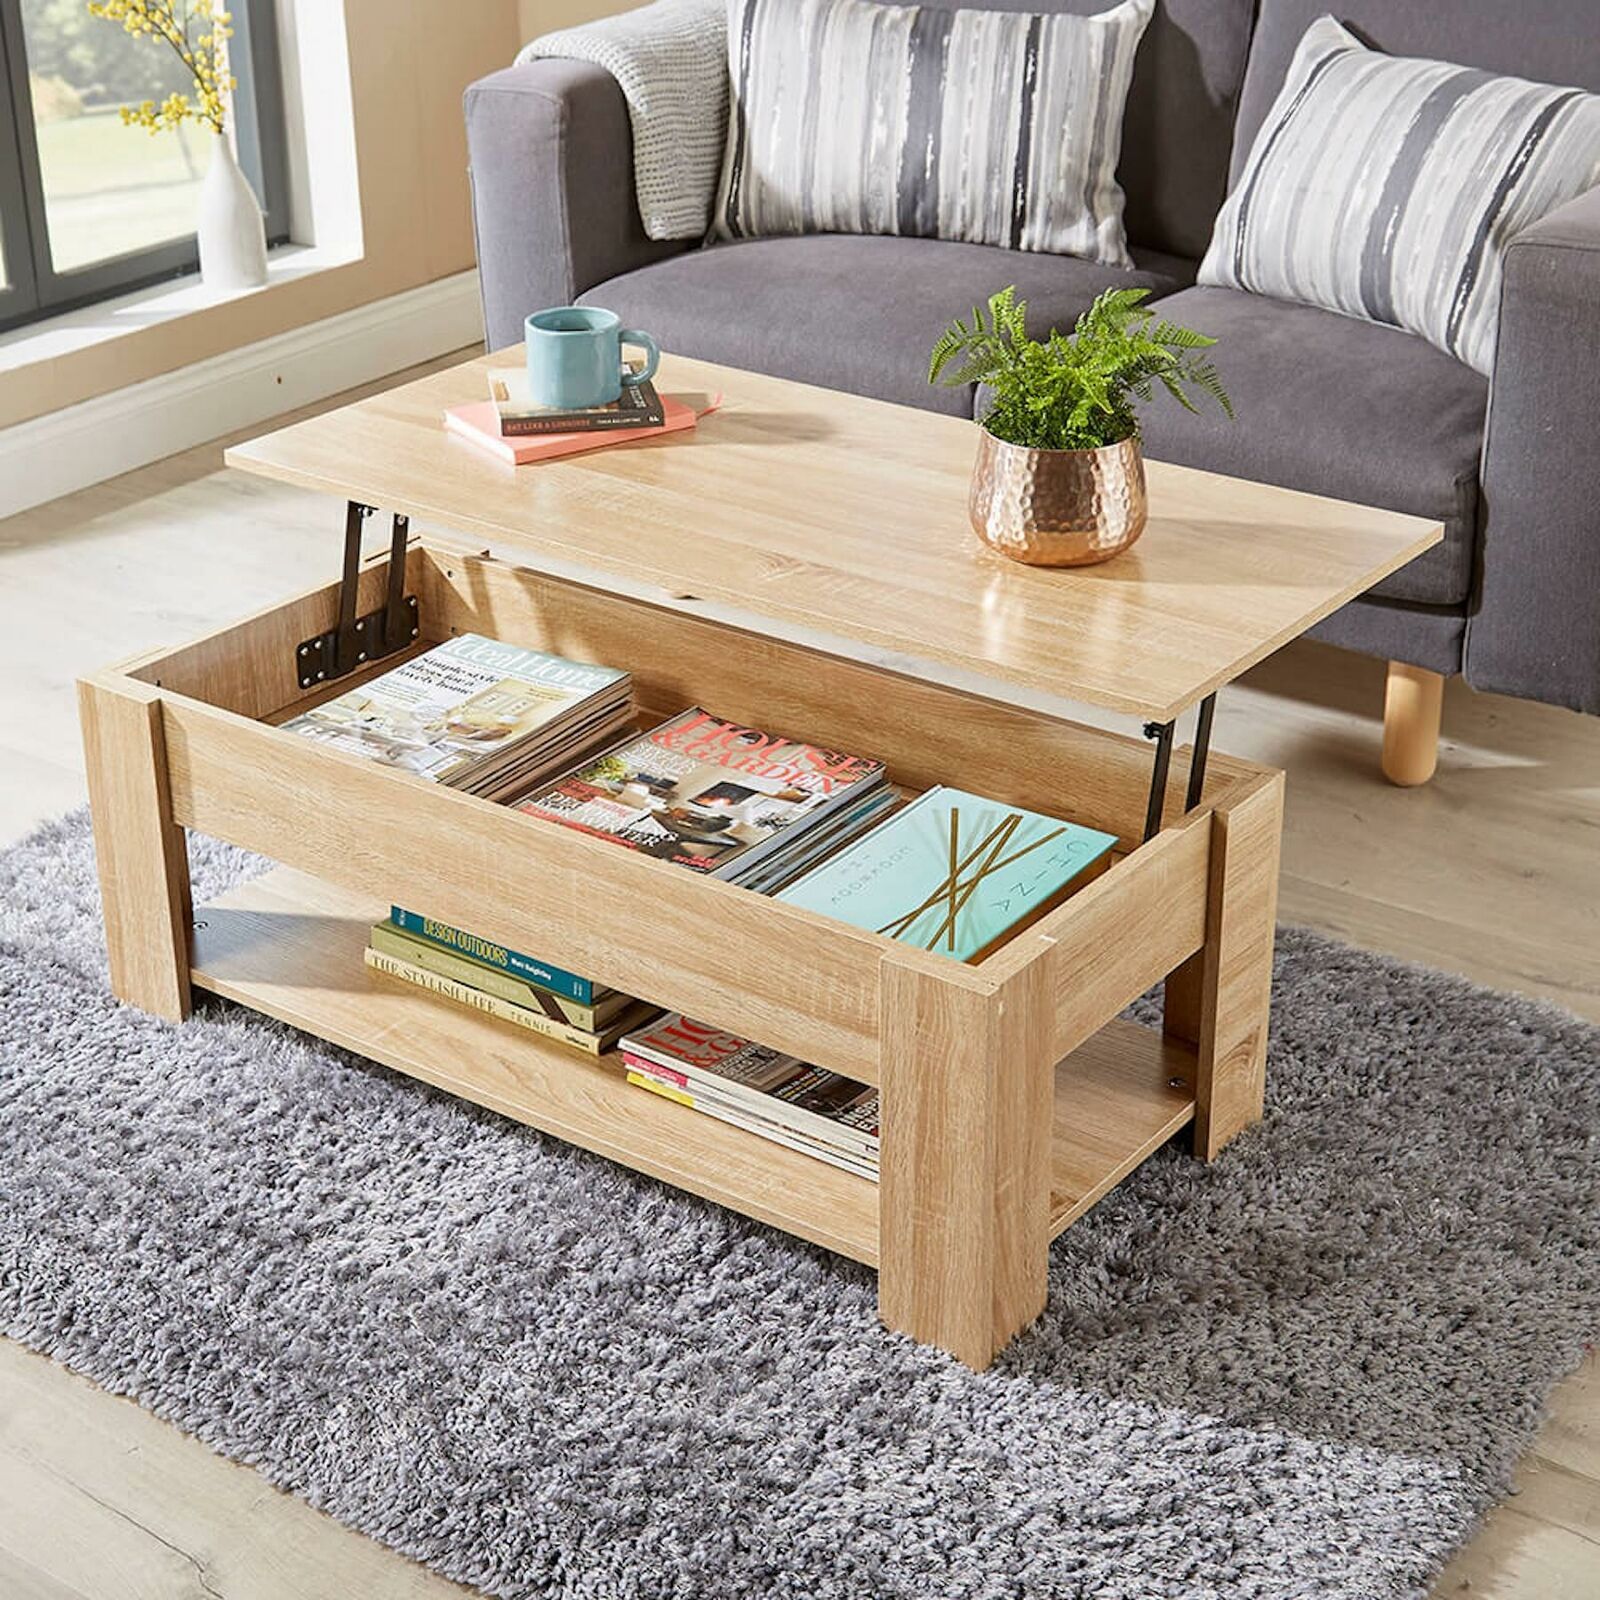 Oak Wooden Coffee Table With Lift Up Top Storage Area And Magazine Shelf |  Ebay In Coffee Tables With Storage (View 10 of 15)